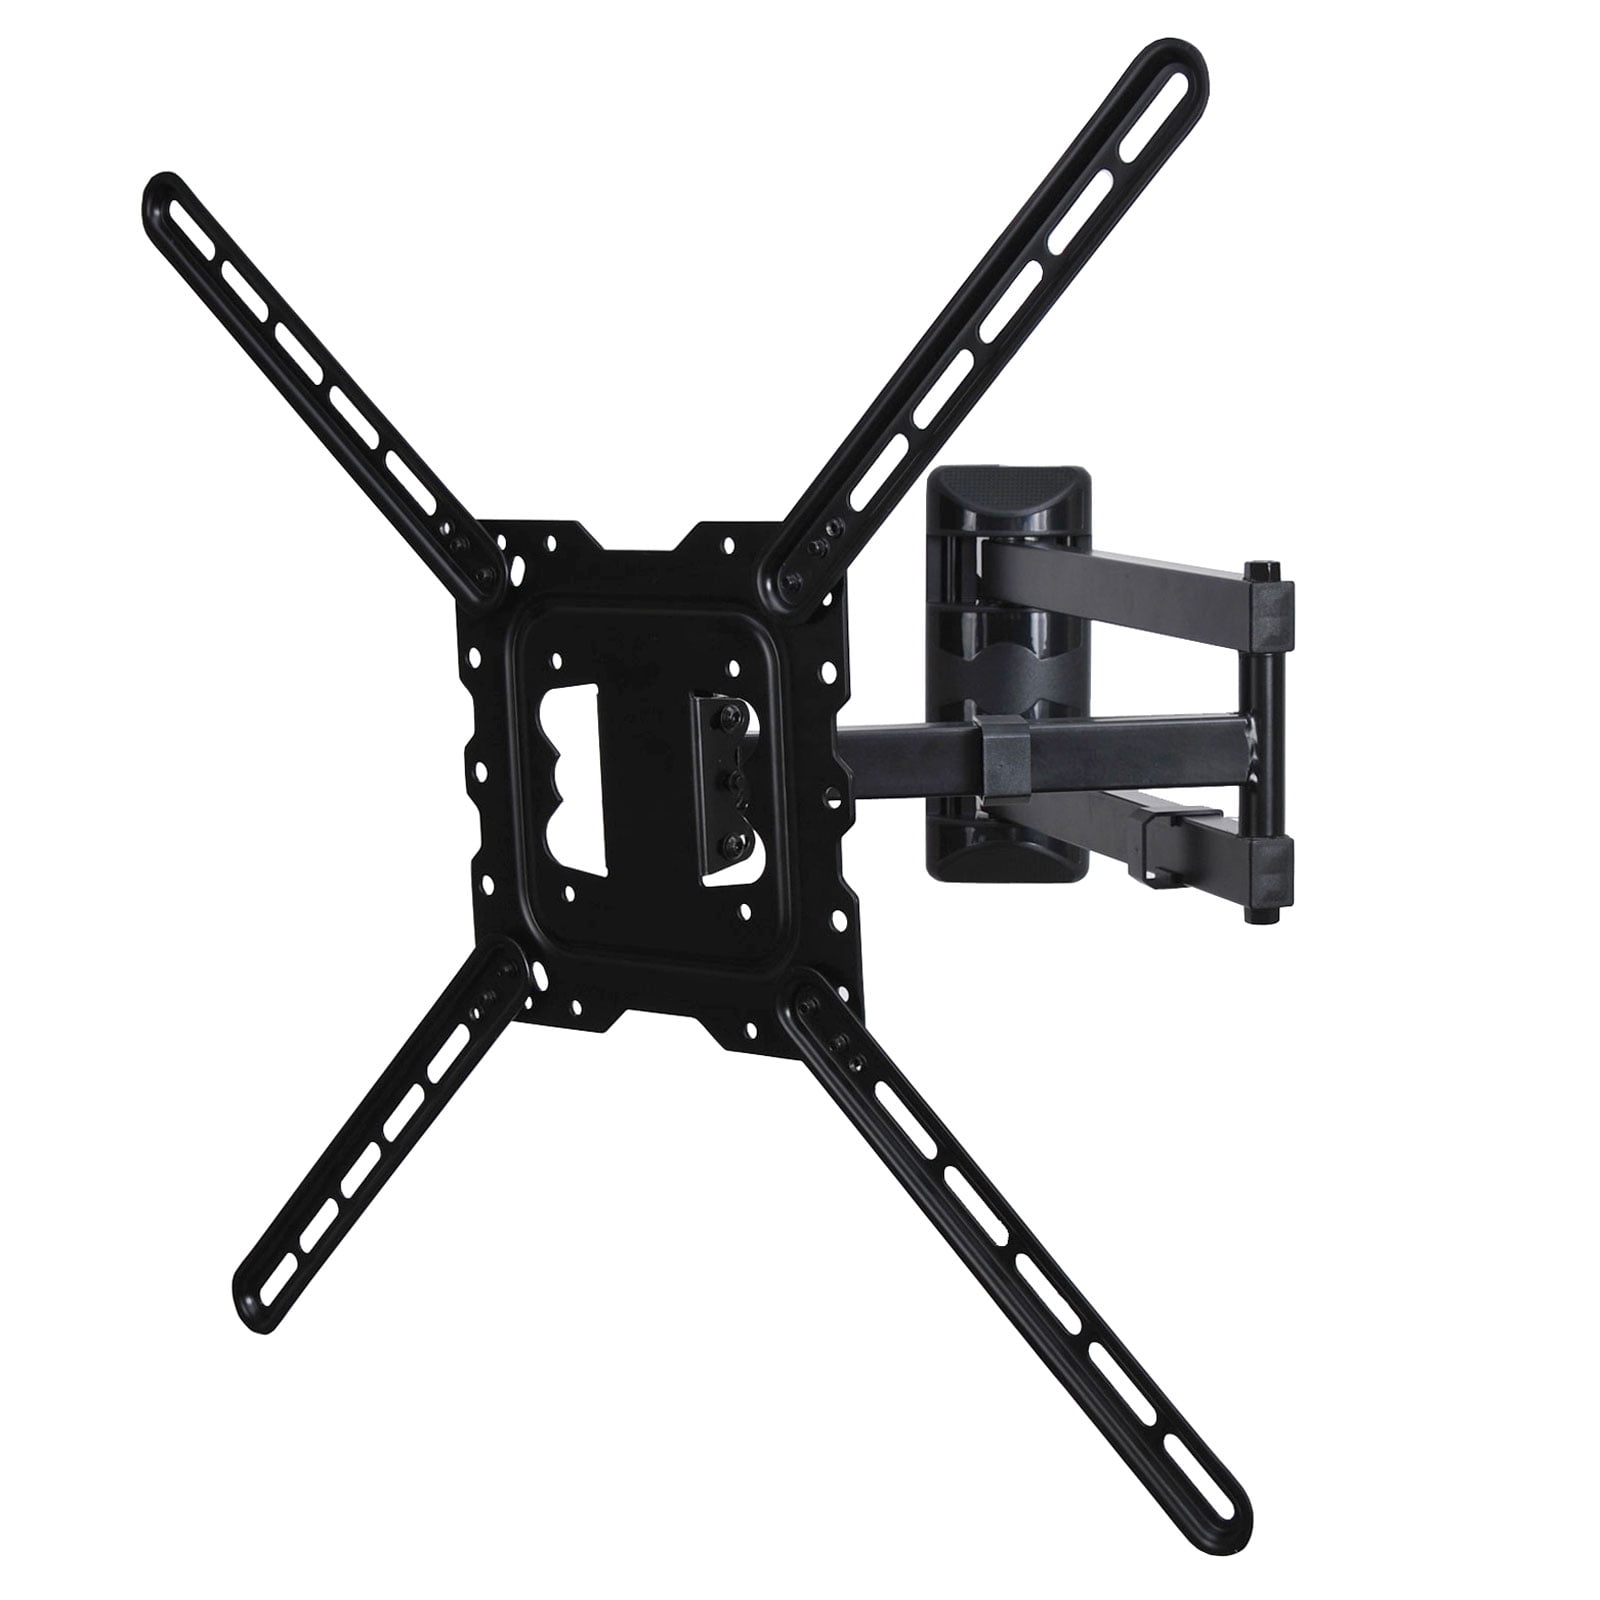 TV Wall Mount Bracket for 26-50" TVs up to VESA 400mm and 66lbs in Extension Arm